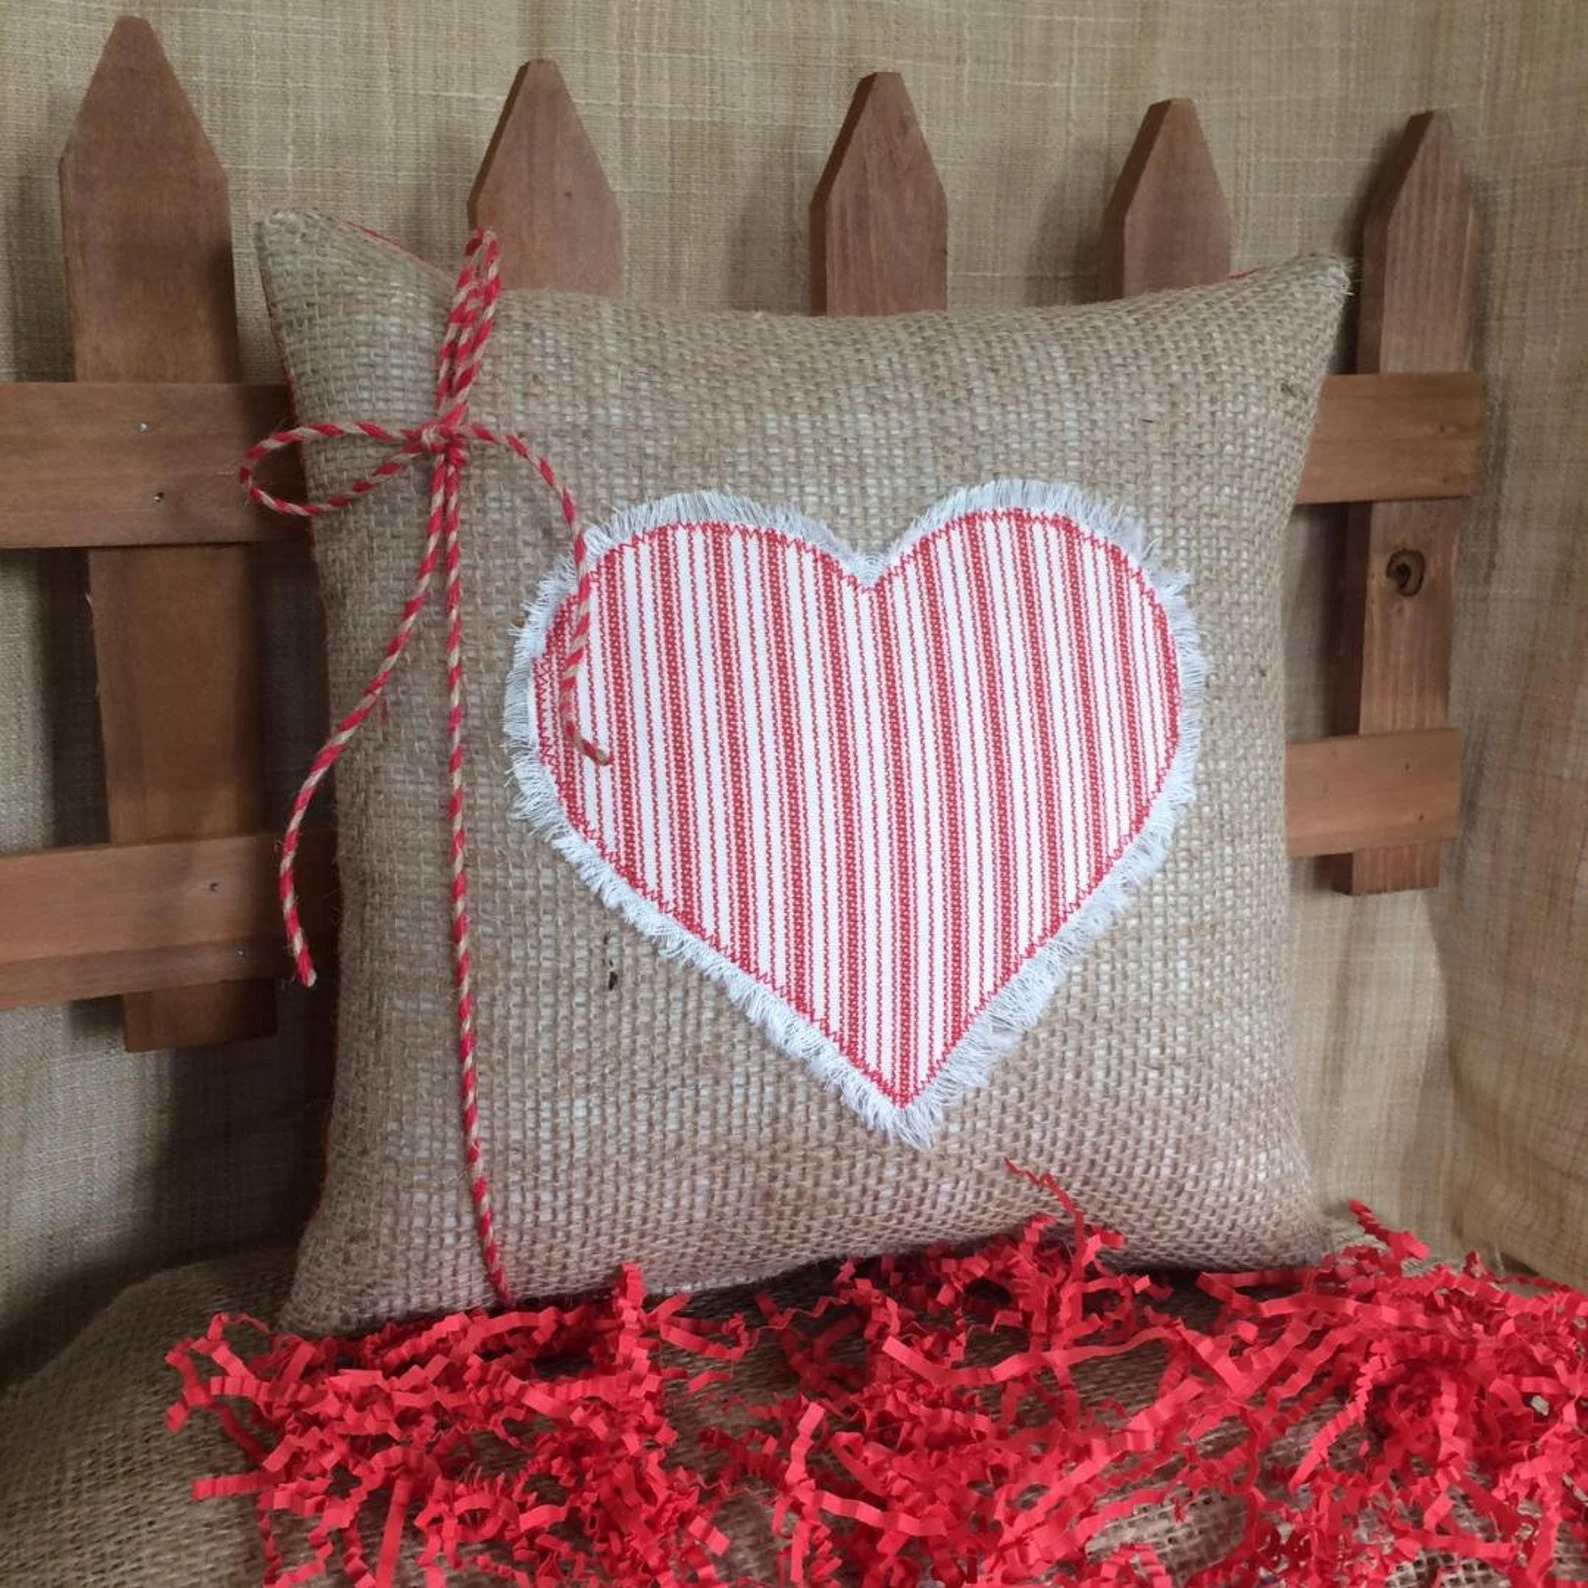 17 Ravishing Valentine's Day Pillow Designs That Will Bring Love To Any Space